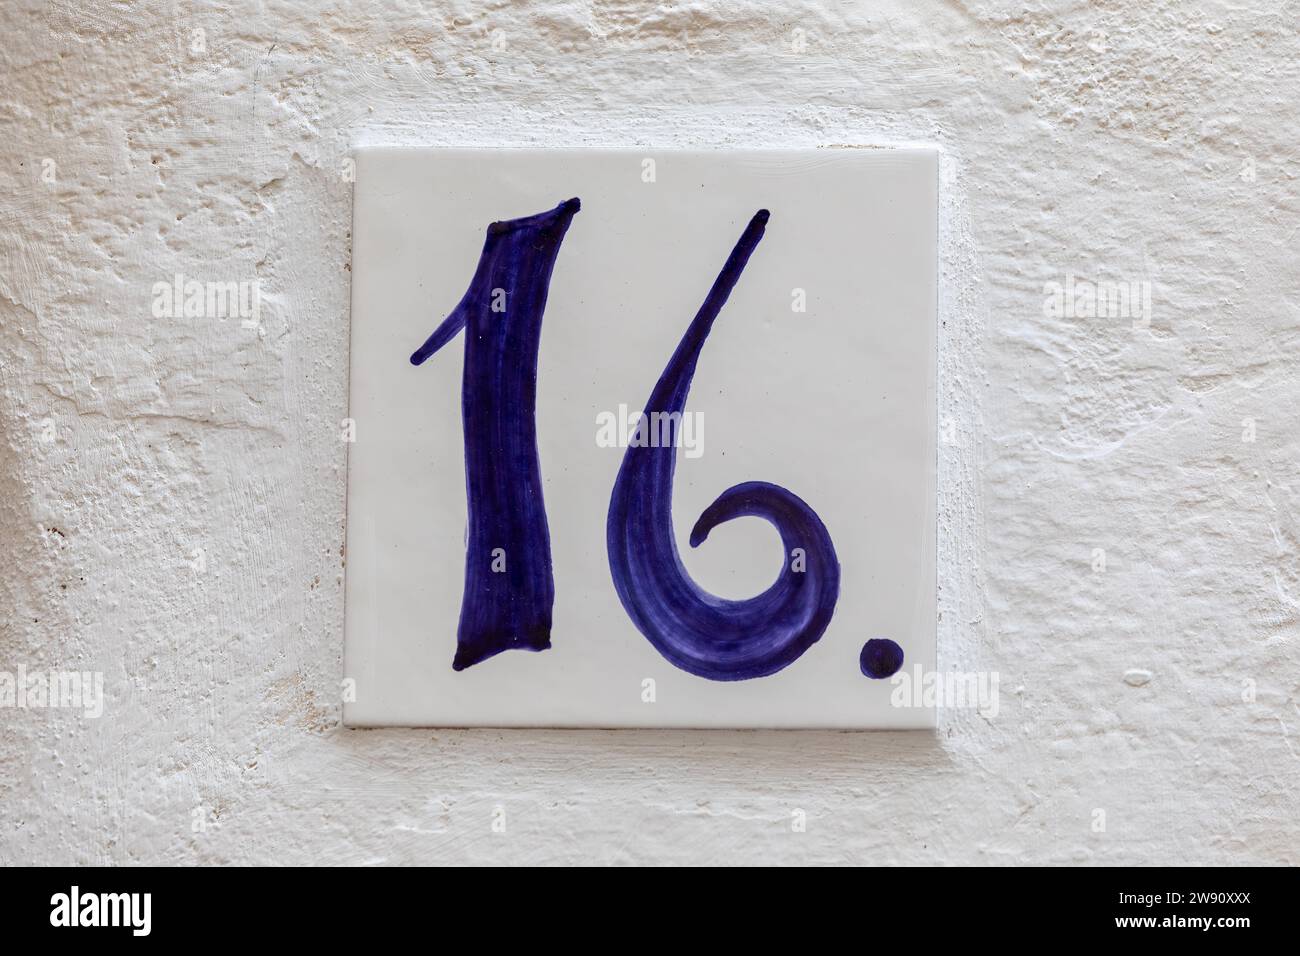 Old Weathered House Number 16, Tile on Wall Stock Photo